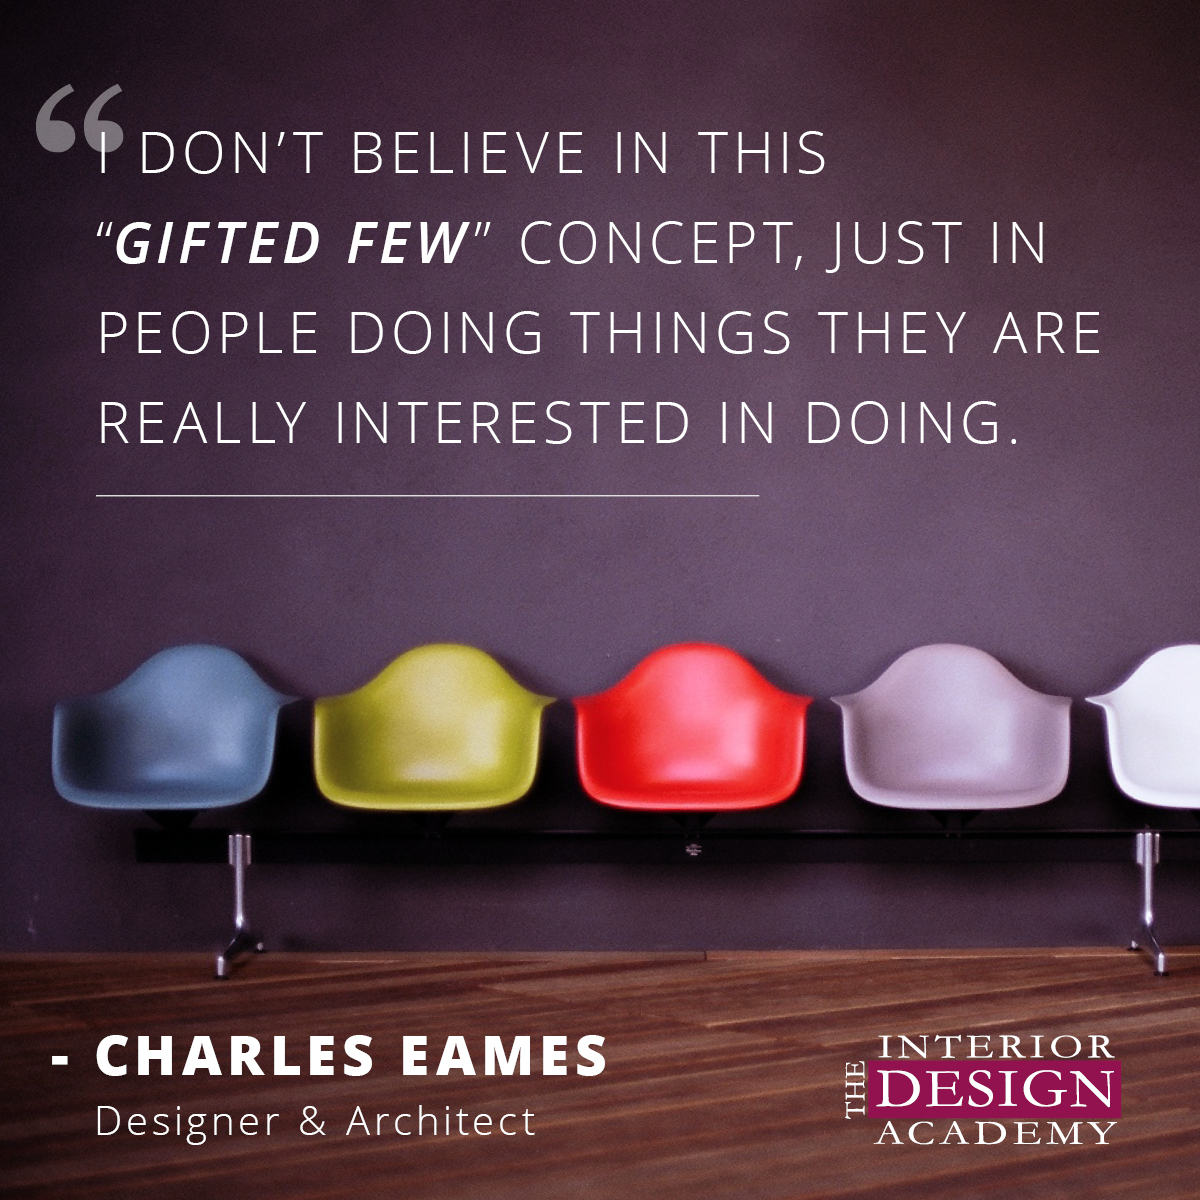 Charles Eames on Pursuing Your Passion